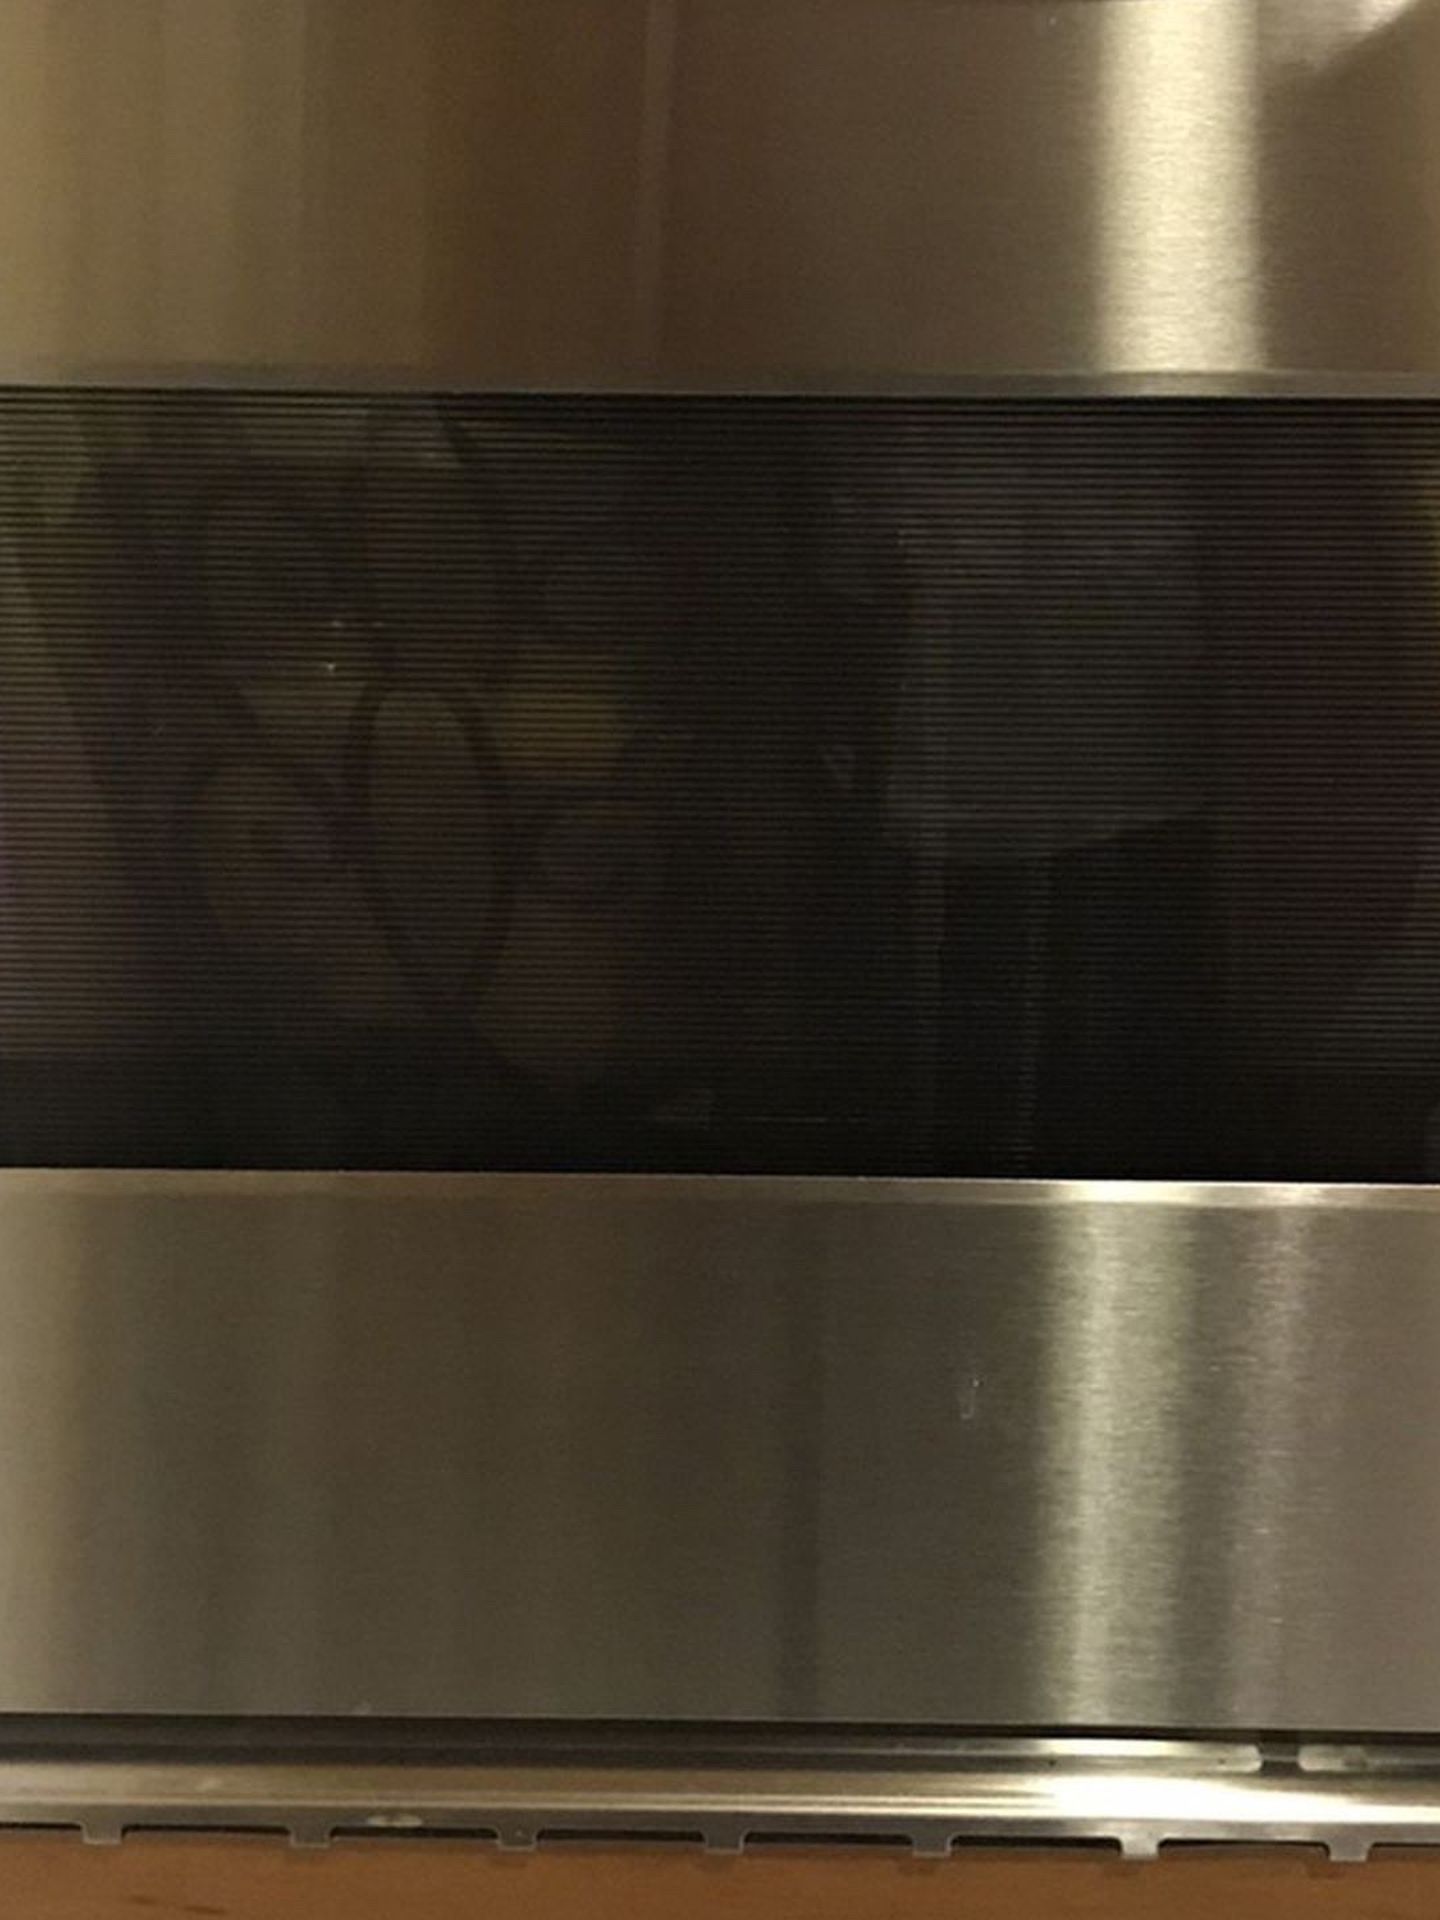 Conventional Oven- Wall Oven